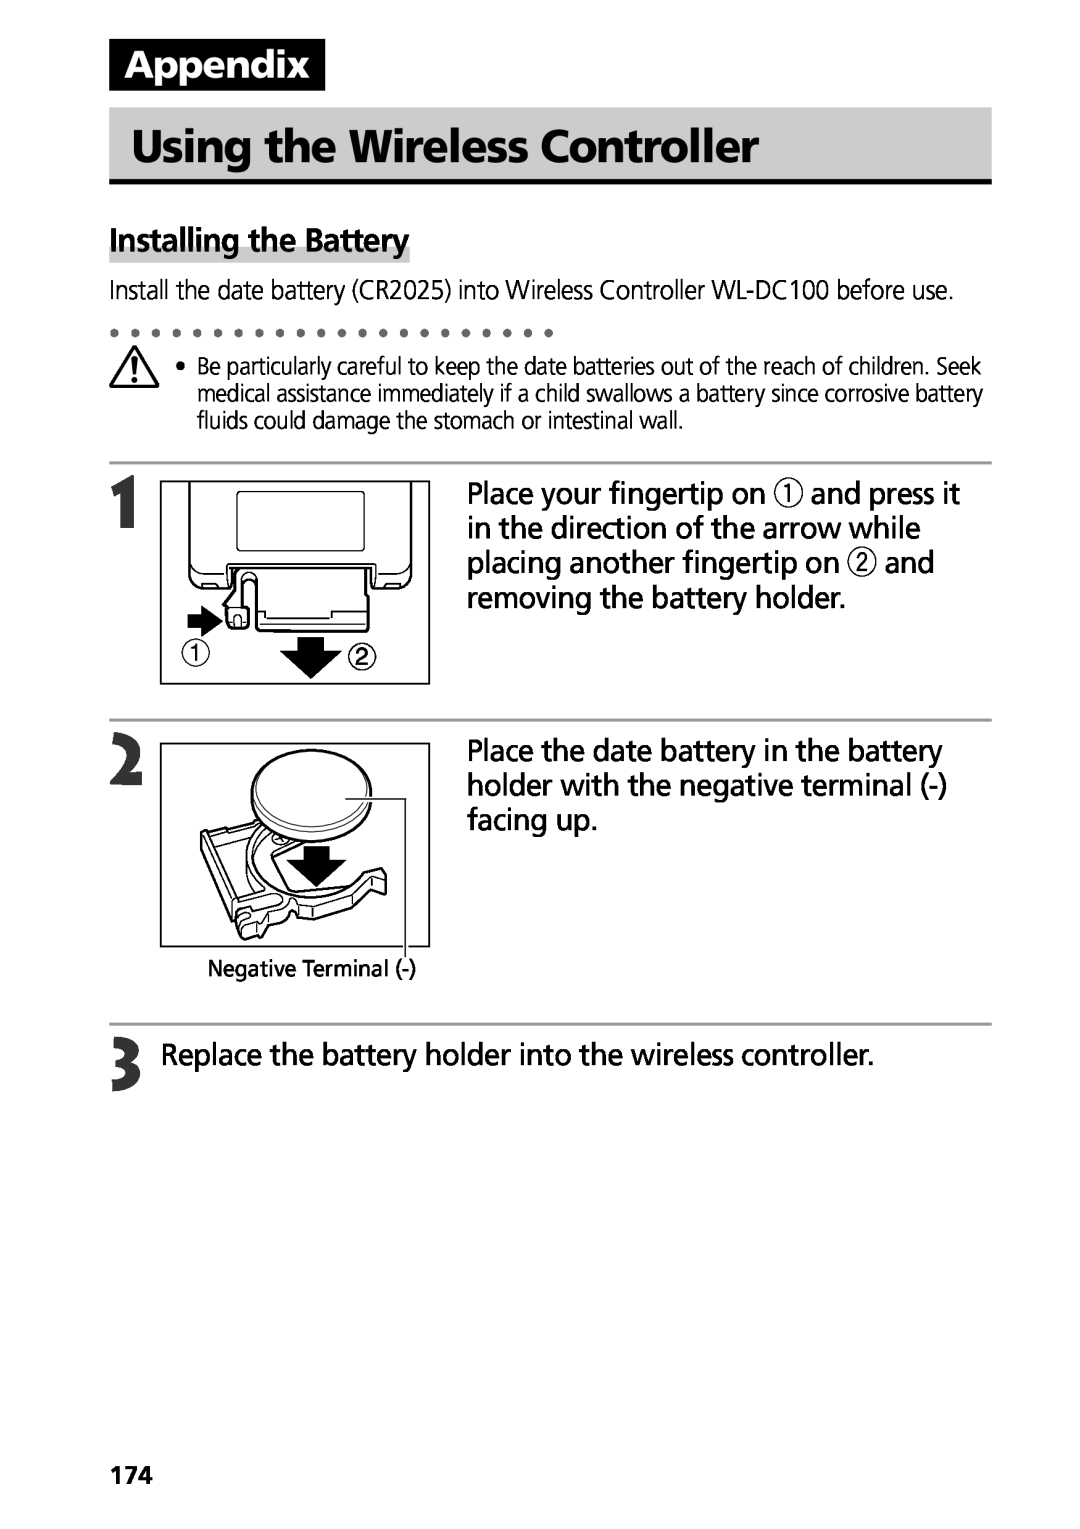 Canon G3 manual Using the Wireless Controller, Appendix, Installing the Battery 